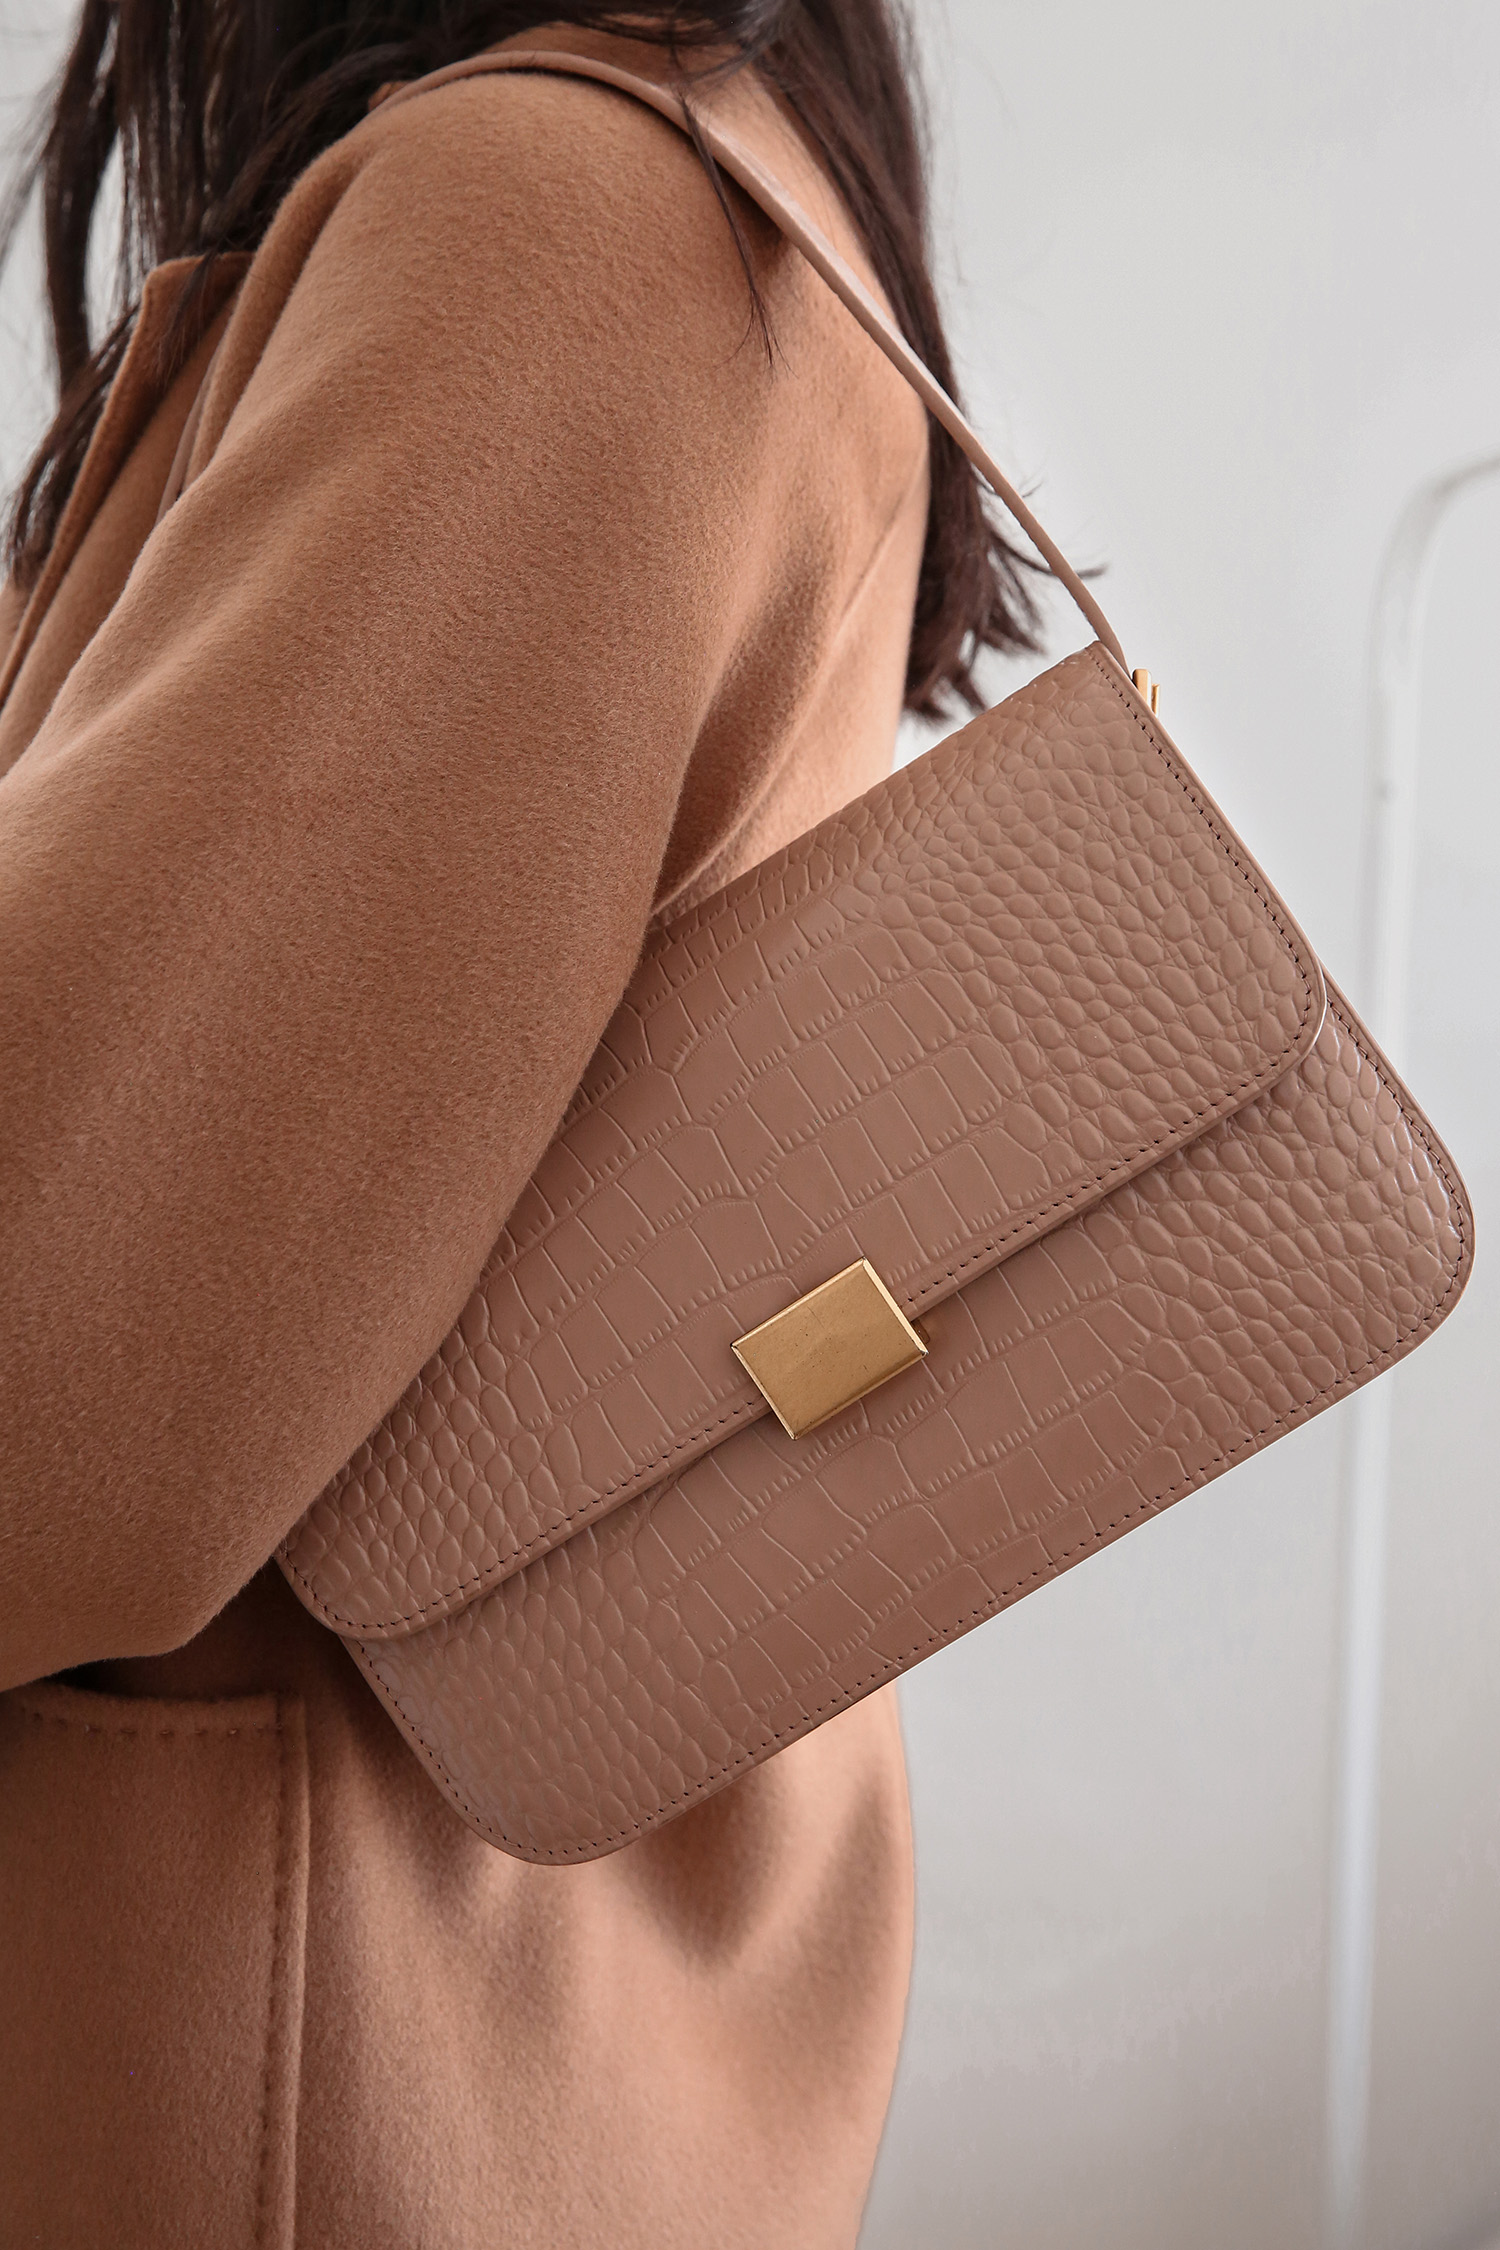 The Curated Shoulder Bag in nude mock croc leather